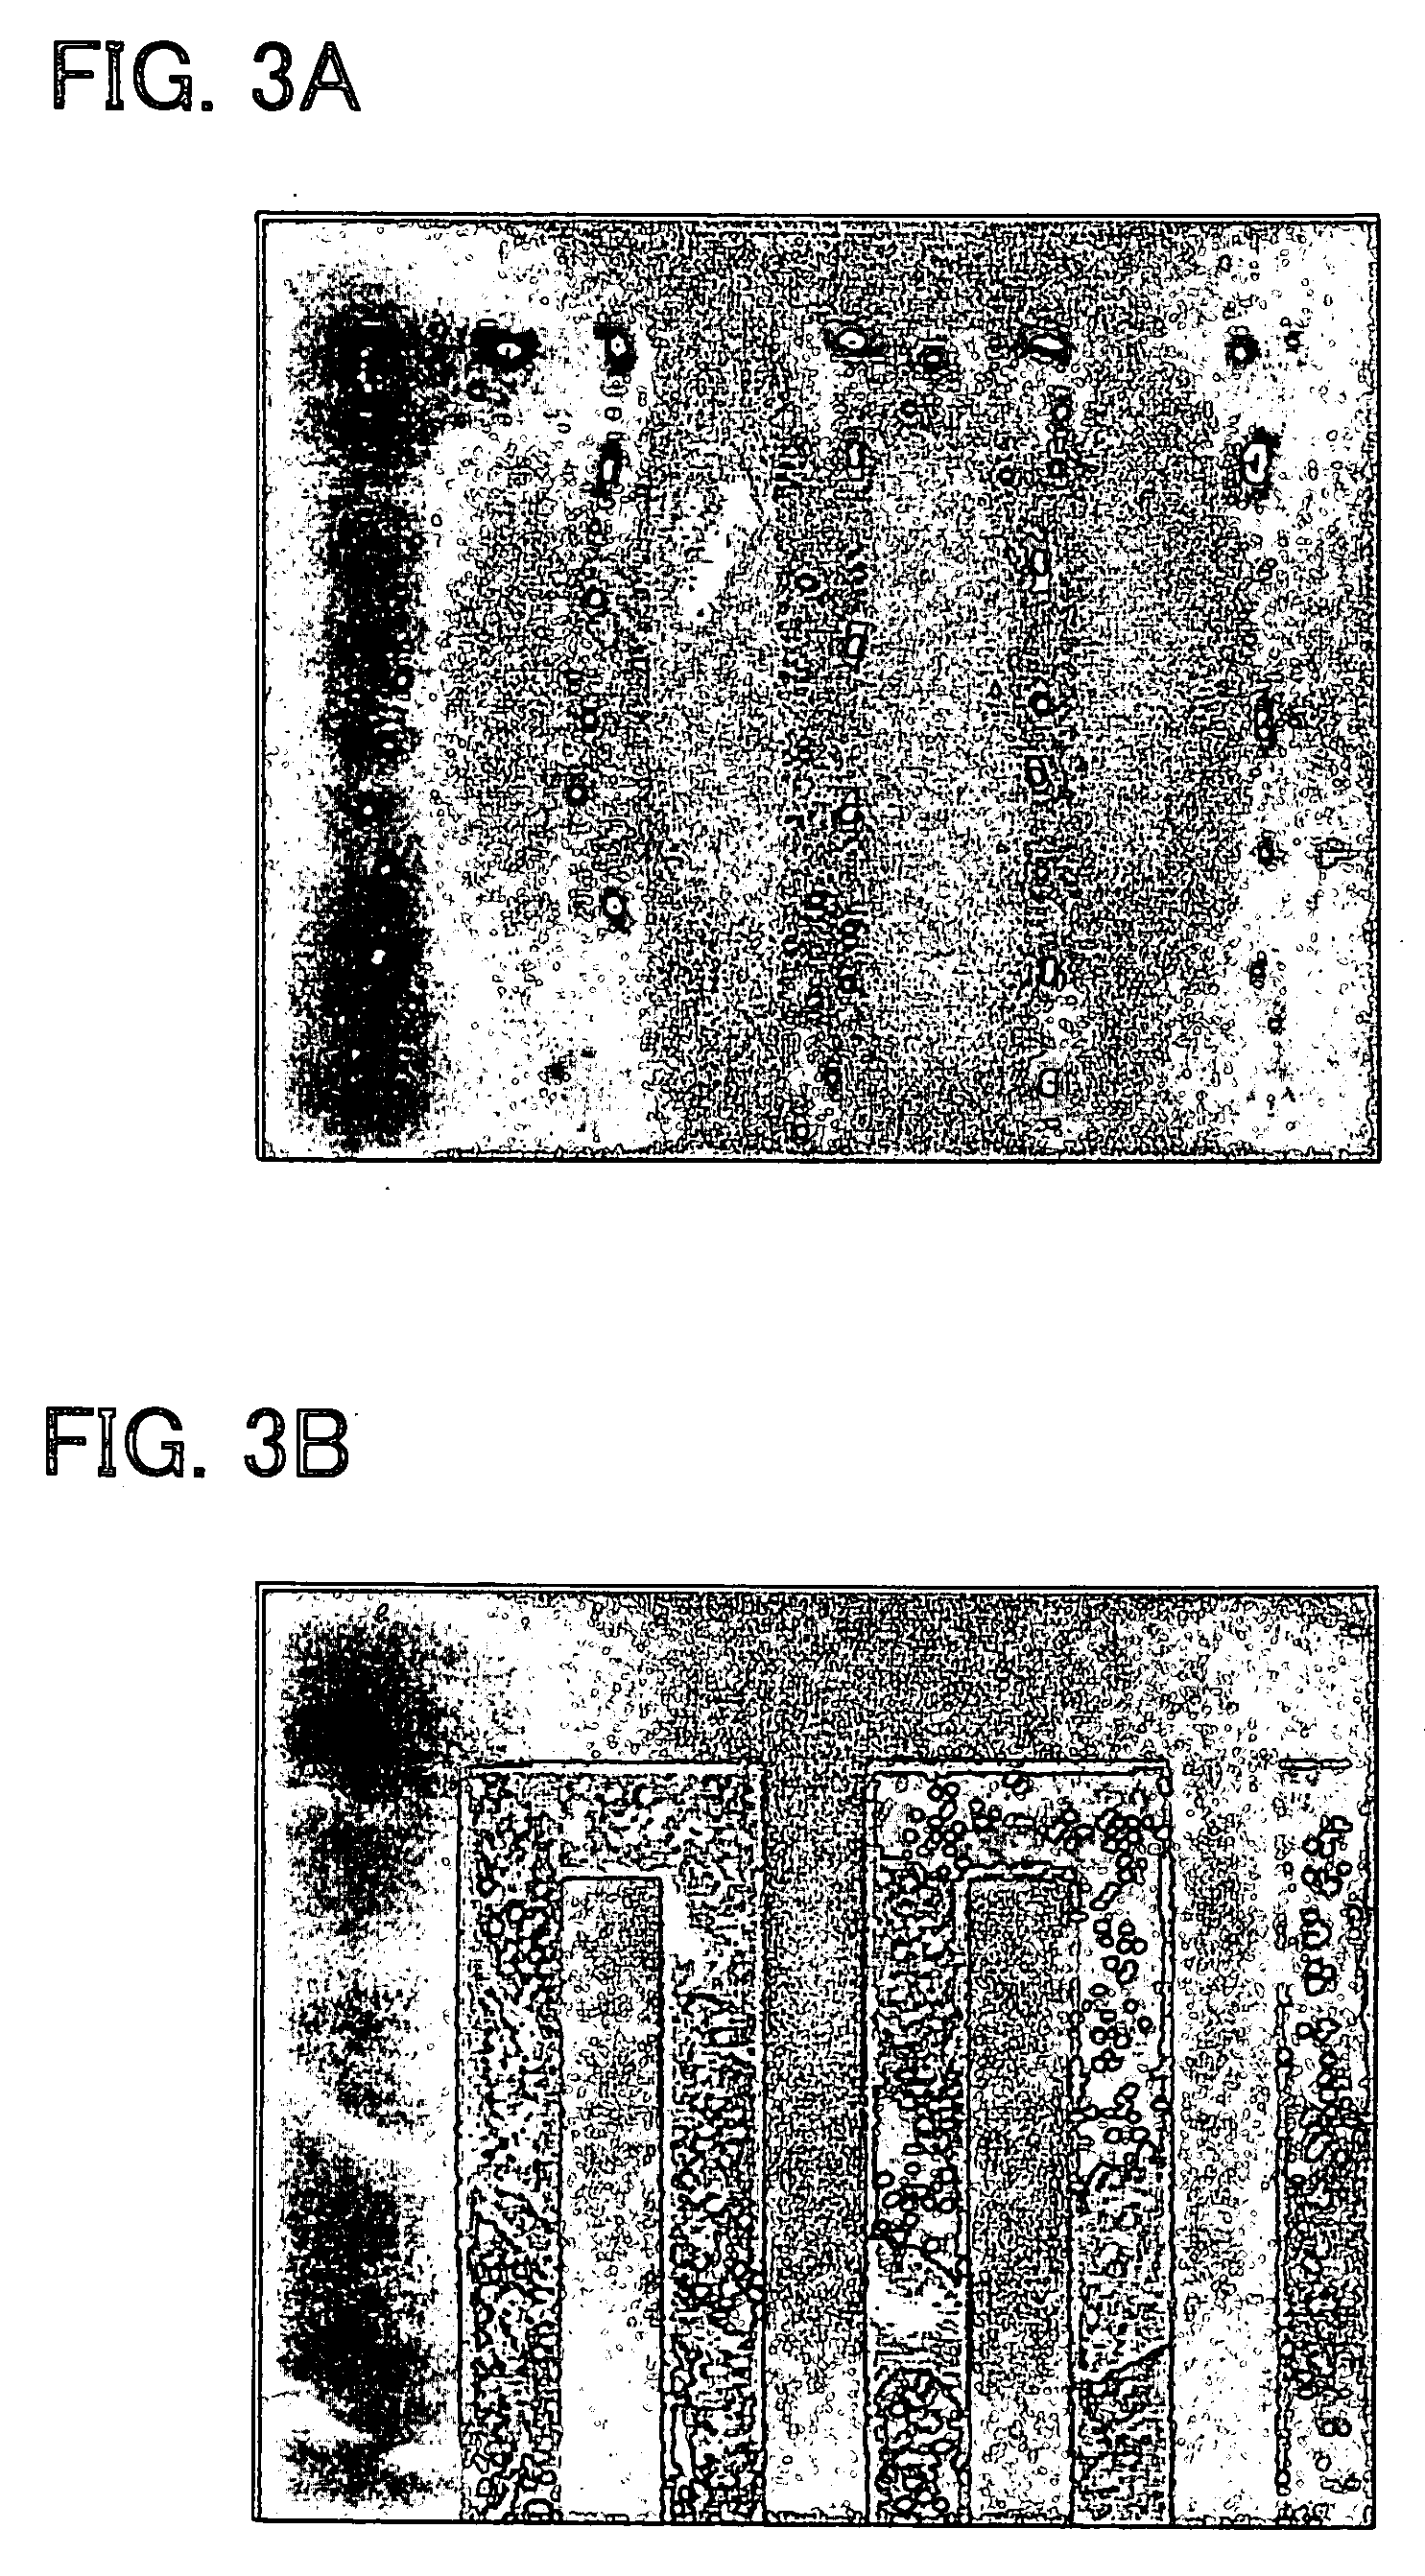 Ceramic electronic component and production method therefor